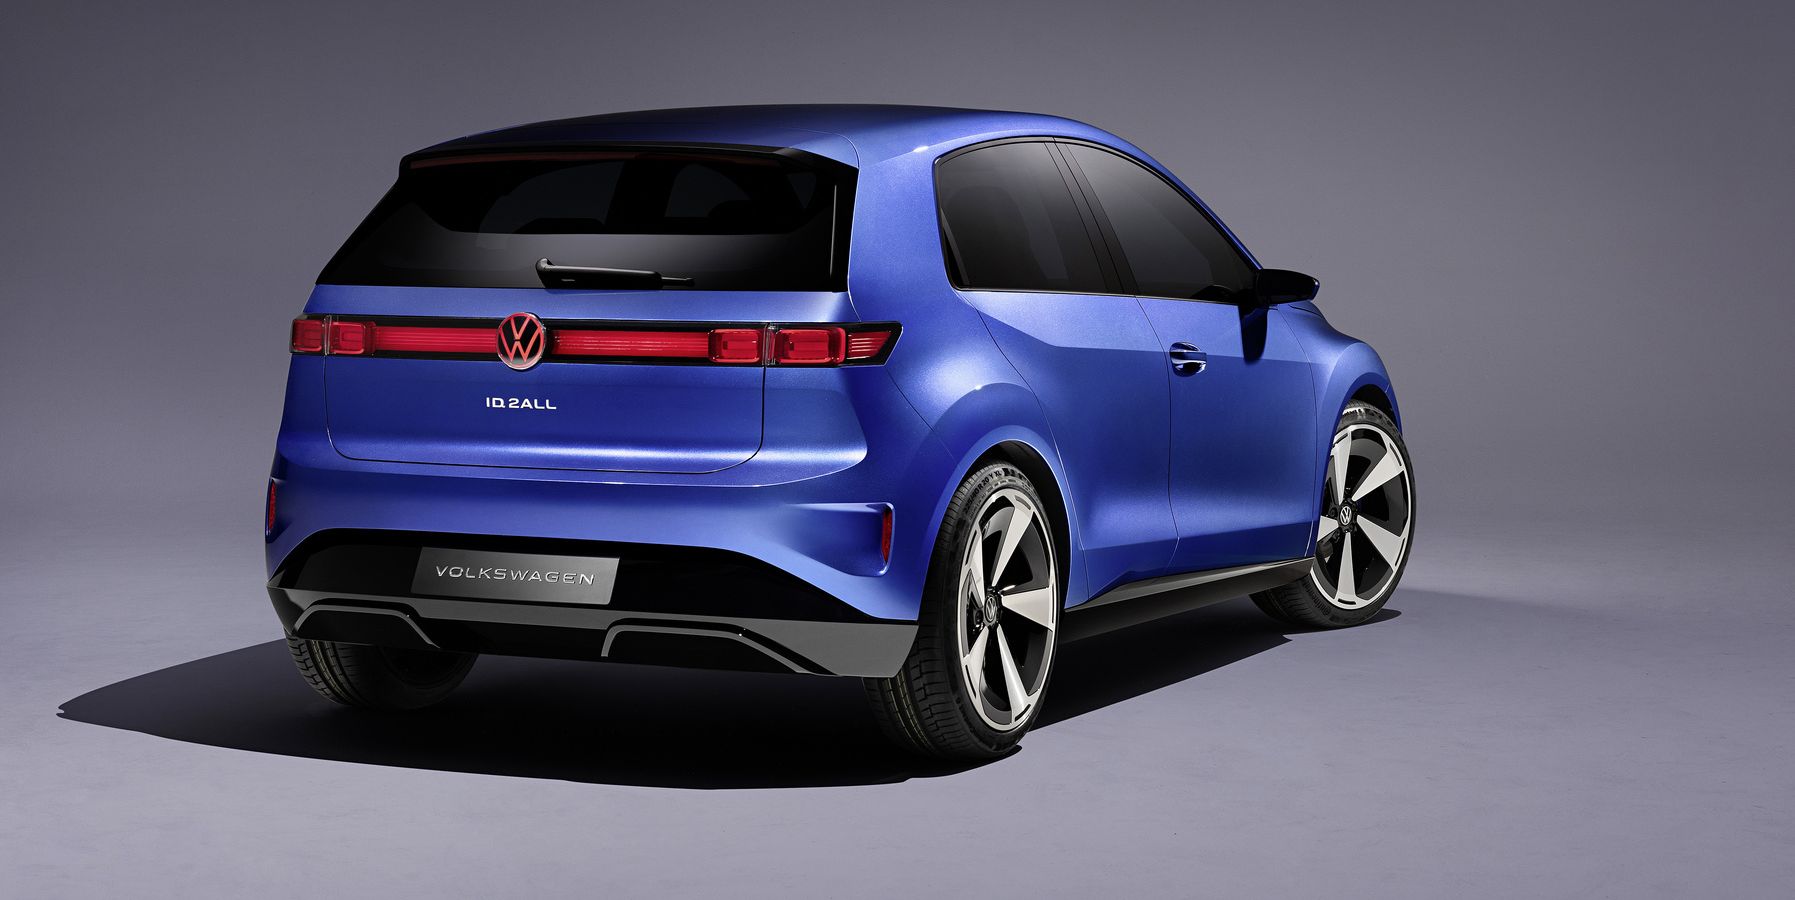 The Volkswagen ID. 2all Concept Previews a Sub-$27,000 EV